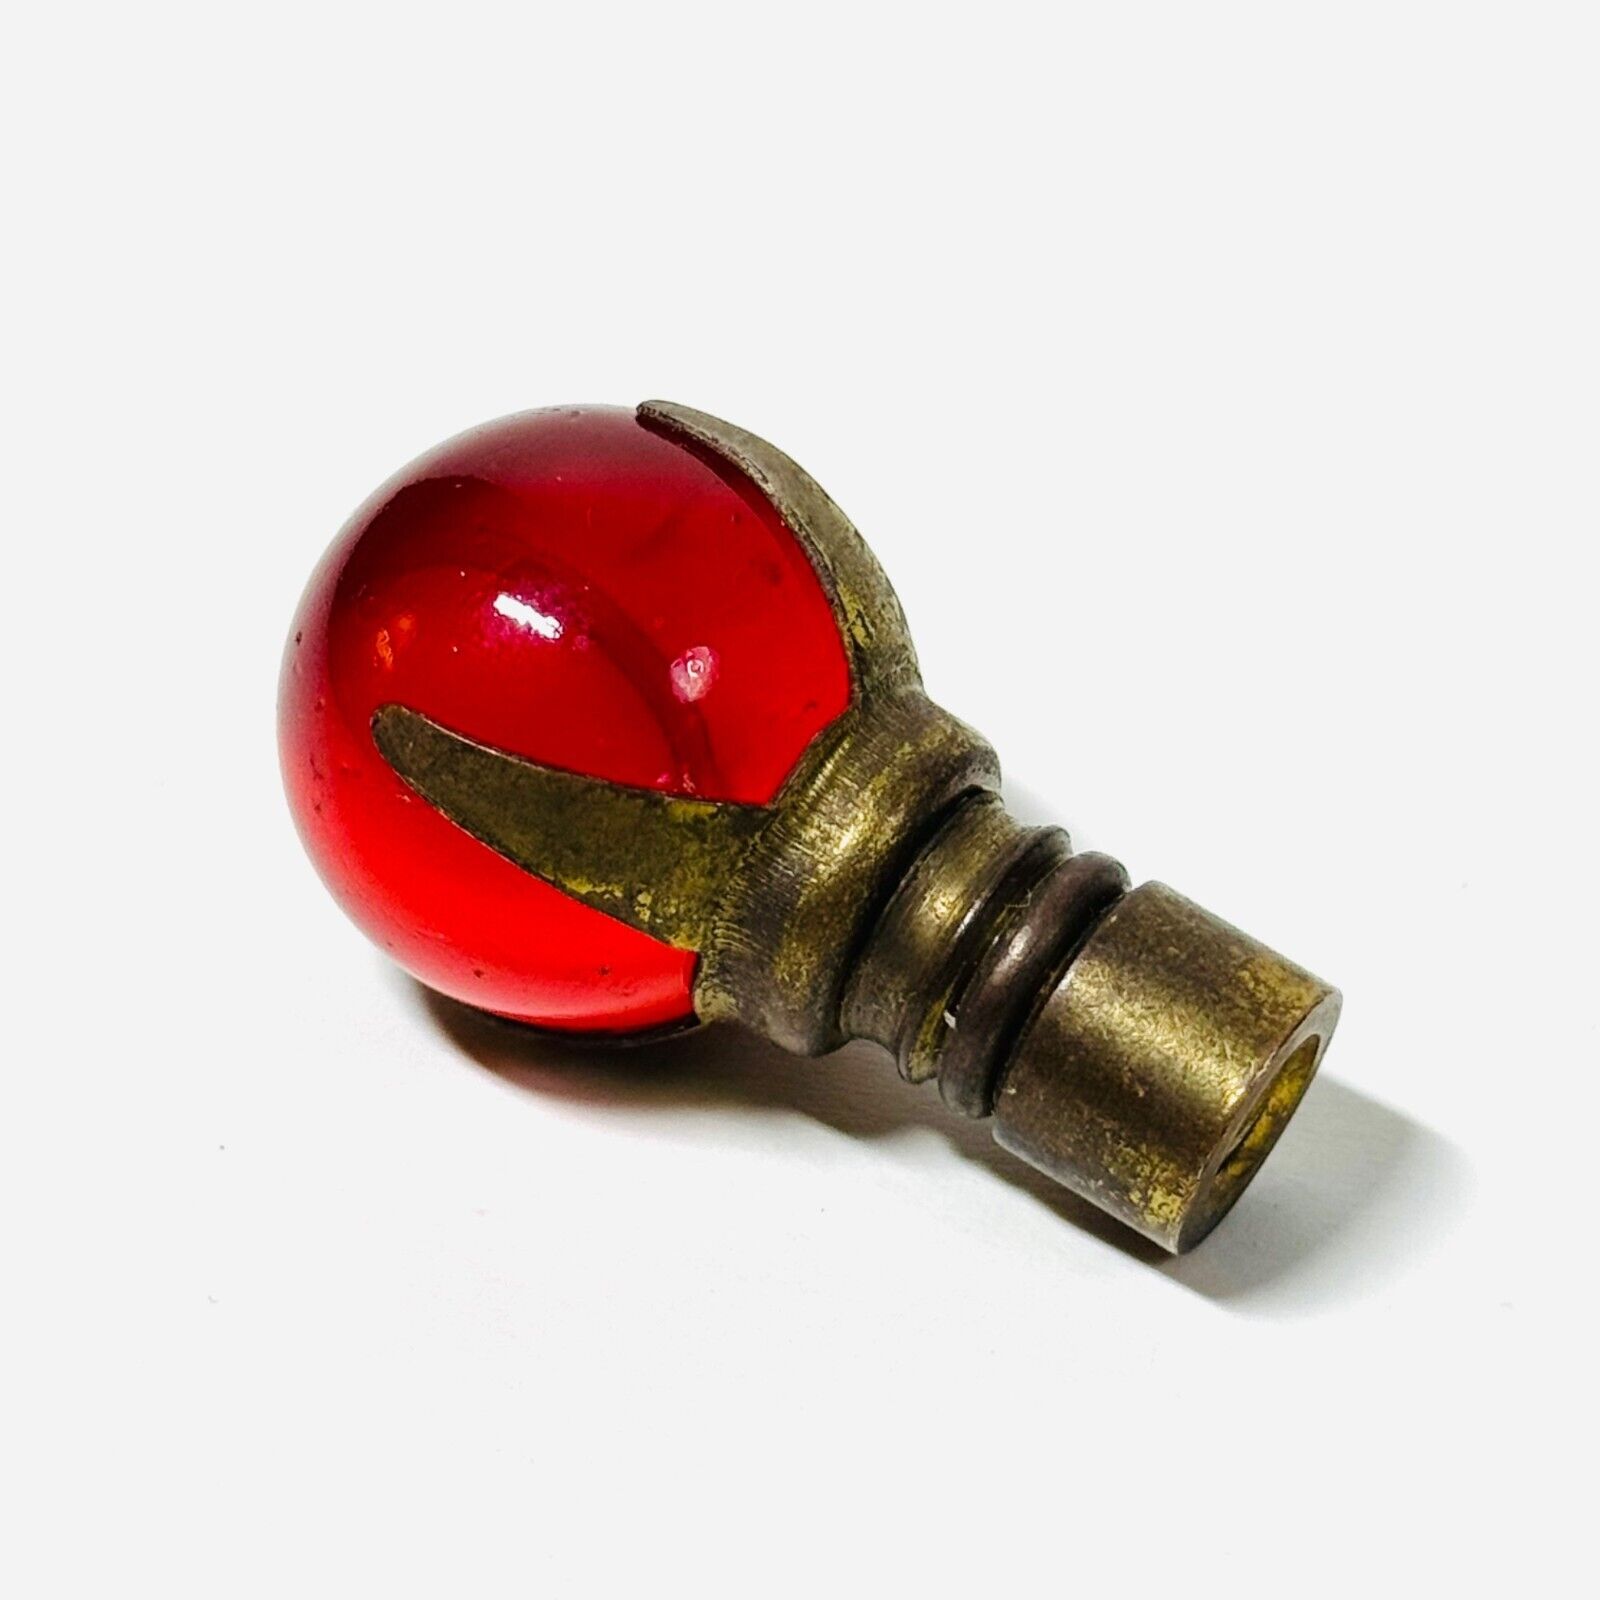 Antique/Vintage Art Deco Red Glass Ball Brass Threaded Lamp Finial